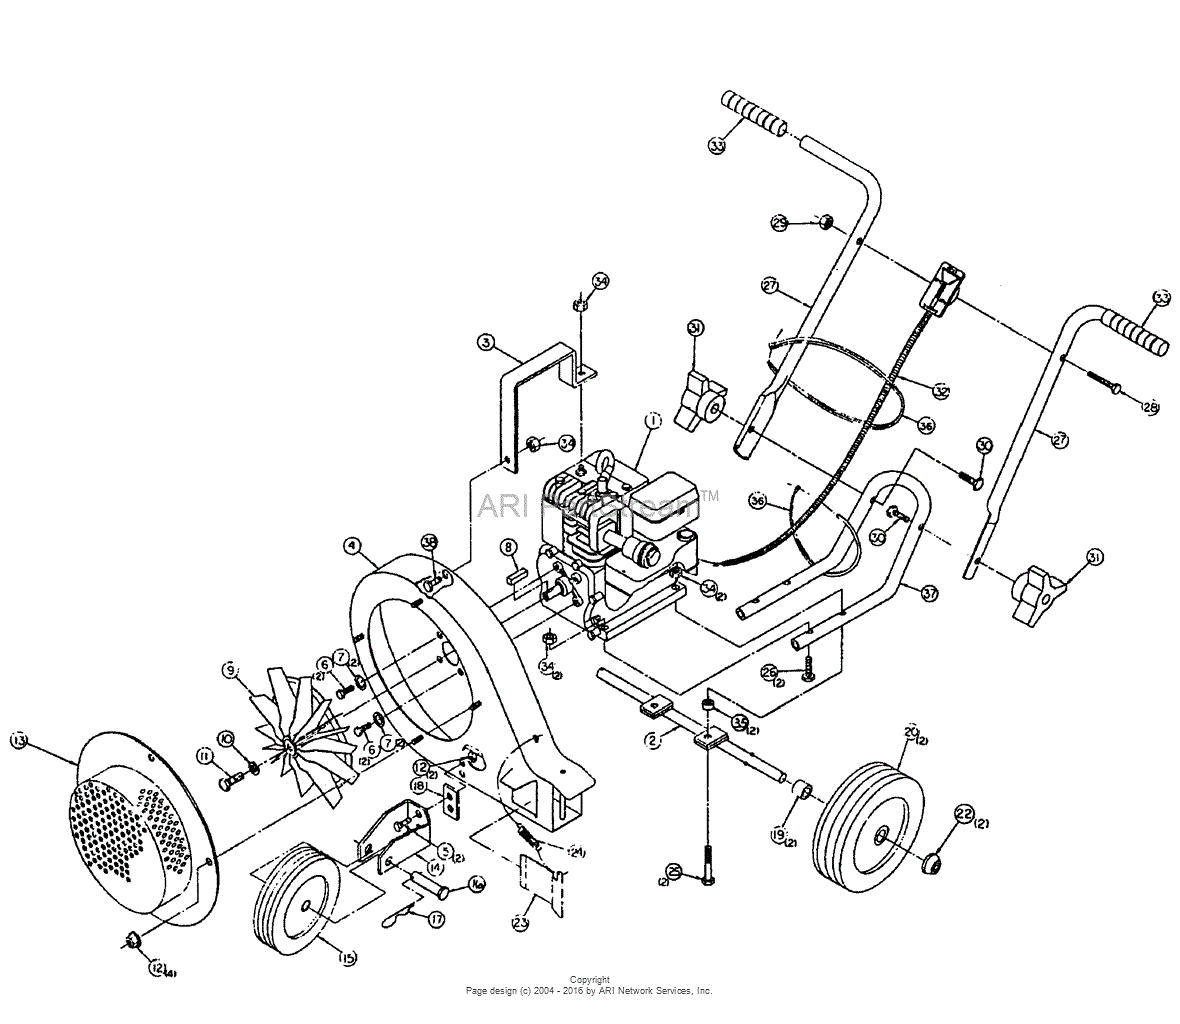 https://az417944.vo.msecnd.net/diagrams/manufacturer/snapper/general-home-yard-equipment/blowers-rolling/slb514-80517-5-hp-leaf-blower/leaf-blower-assembly/diagram.gif